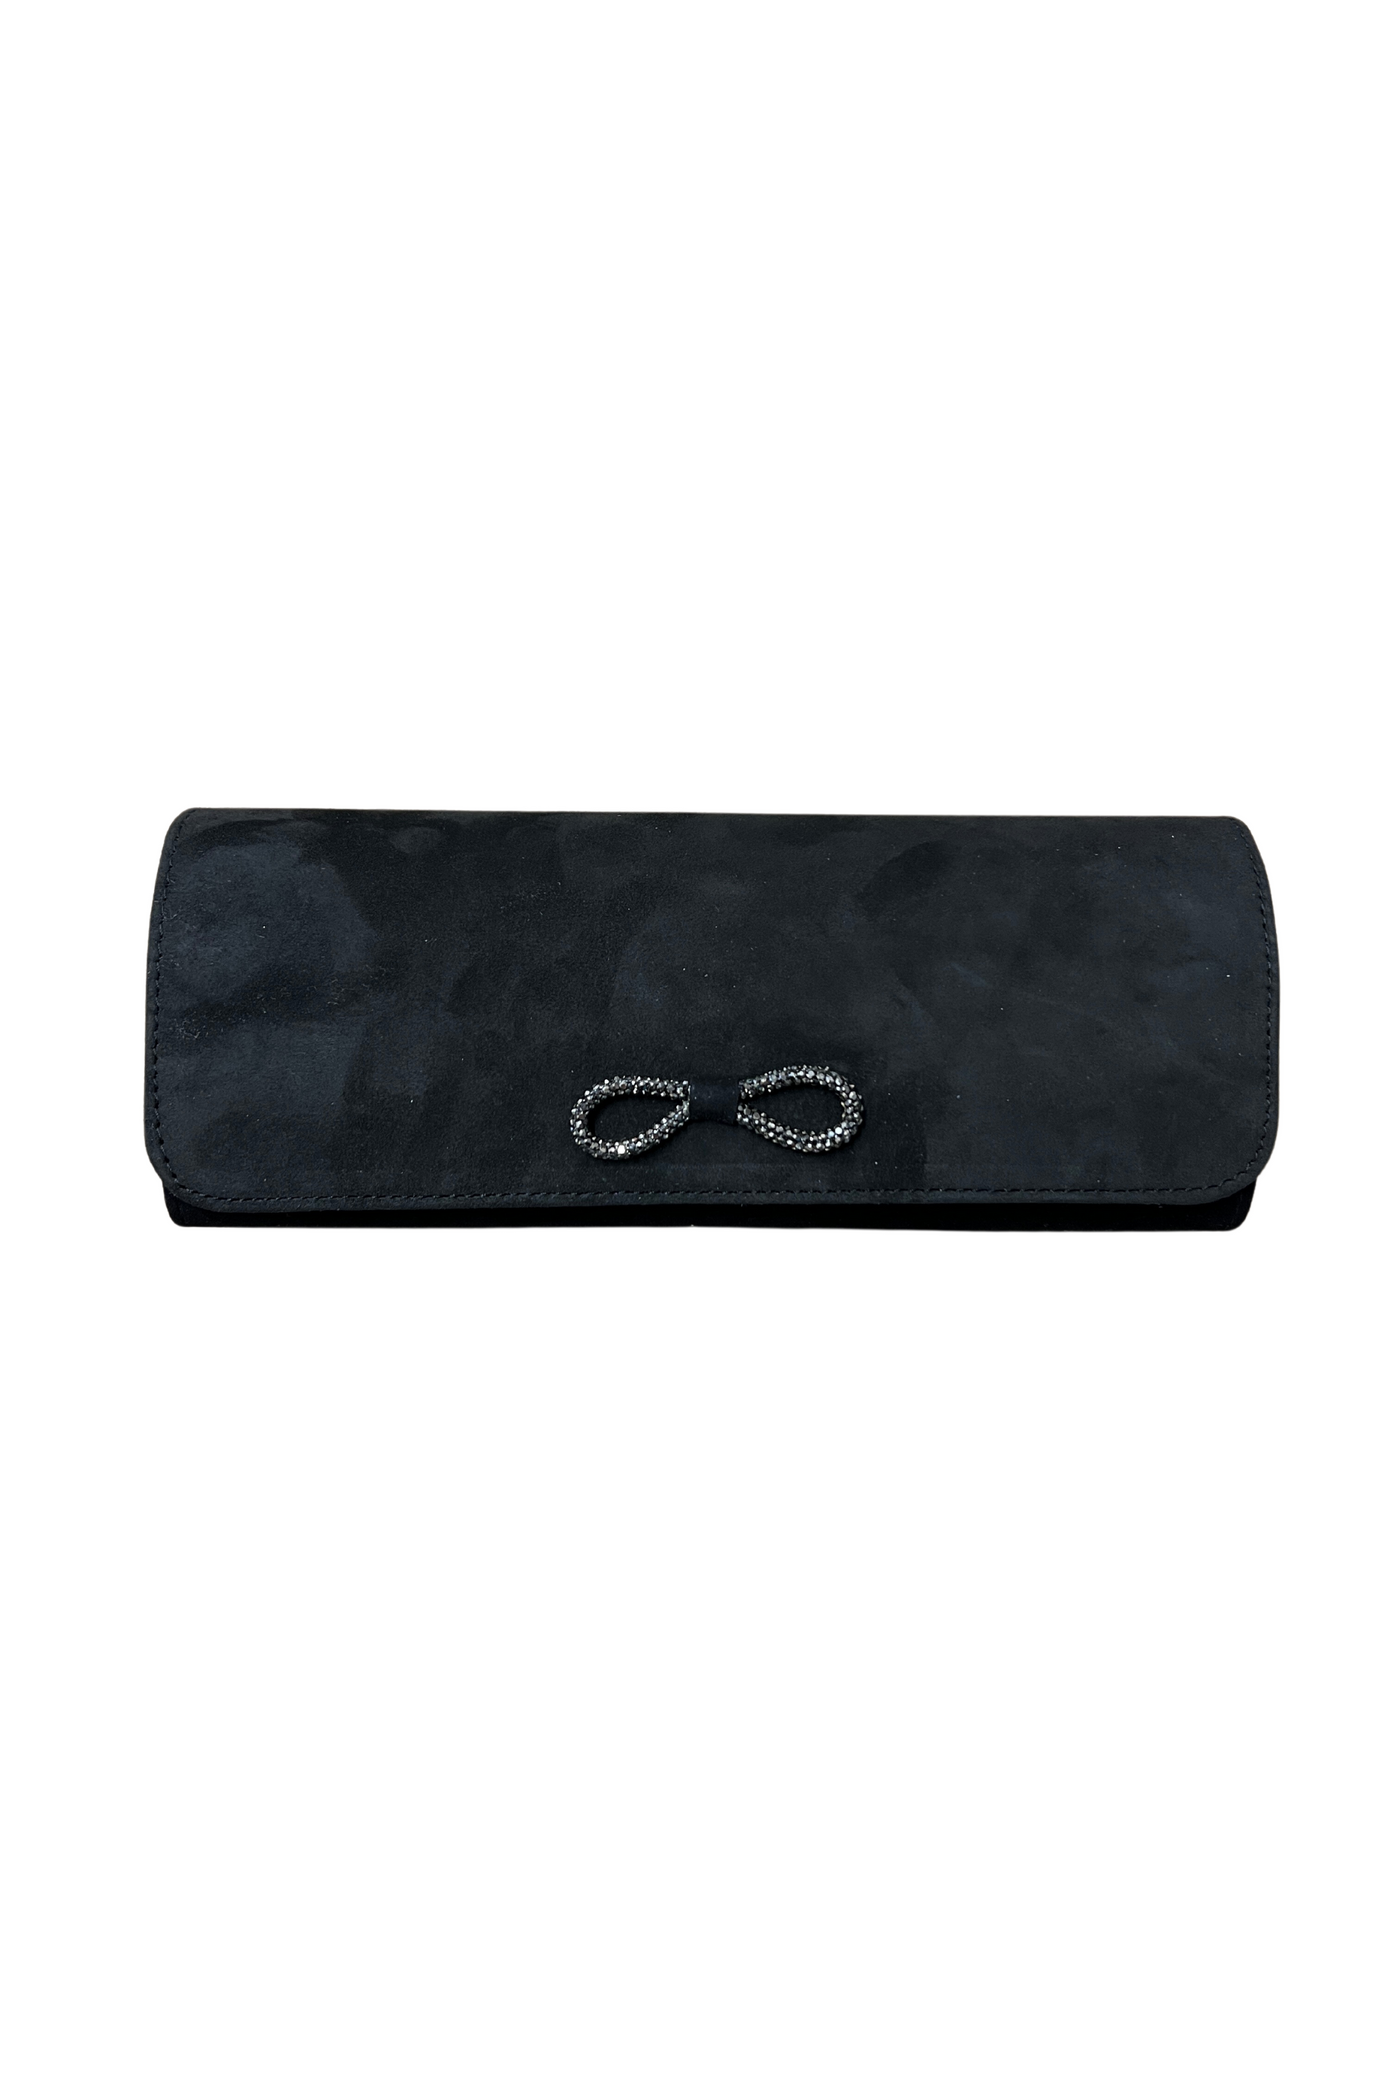 Black Suede Clutch with Bow Detail